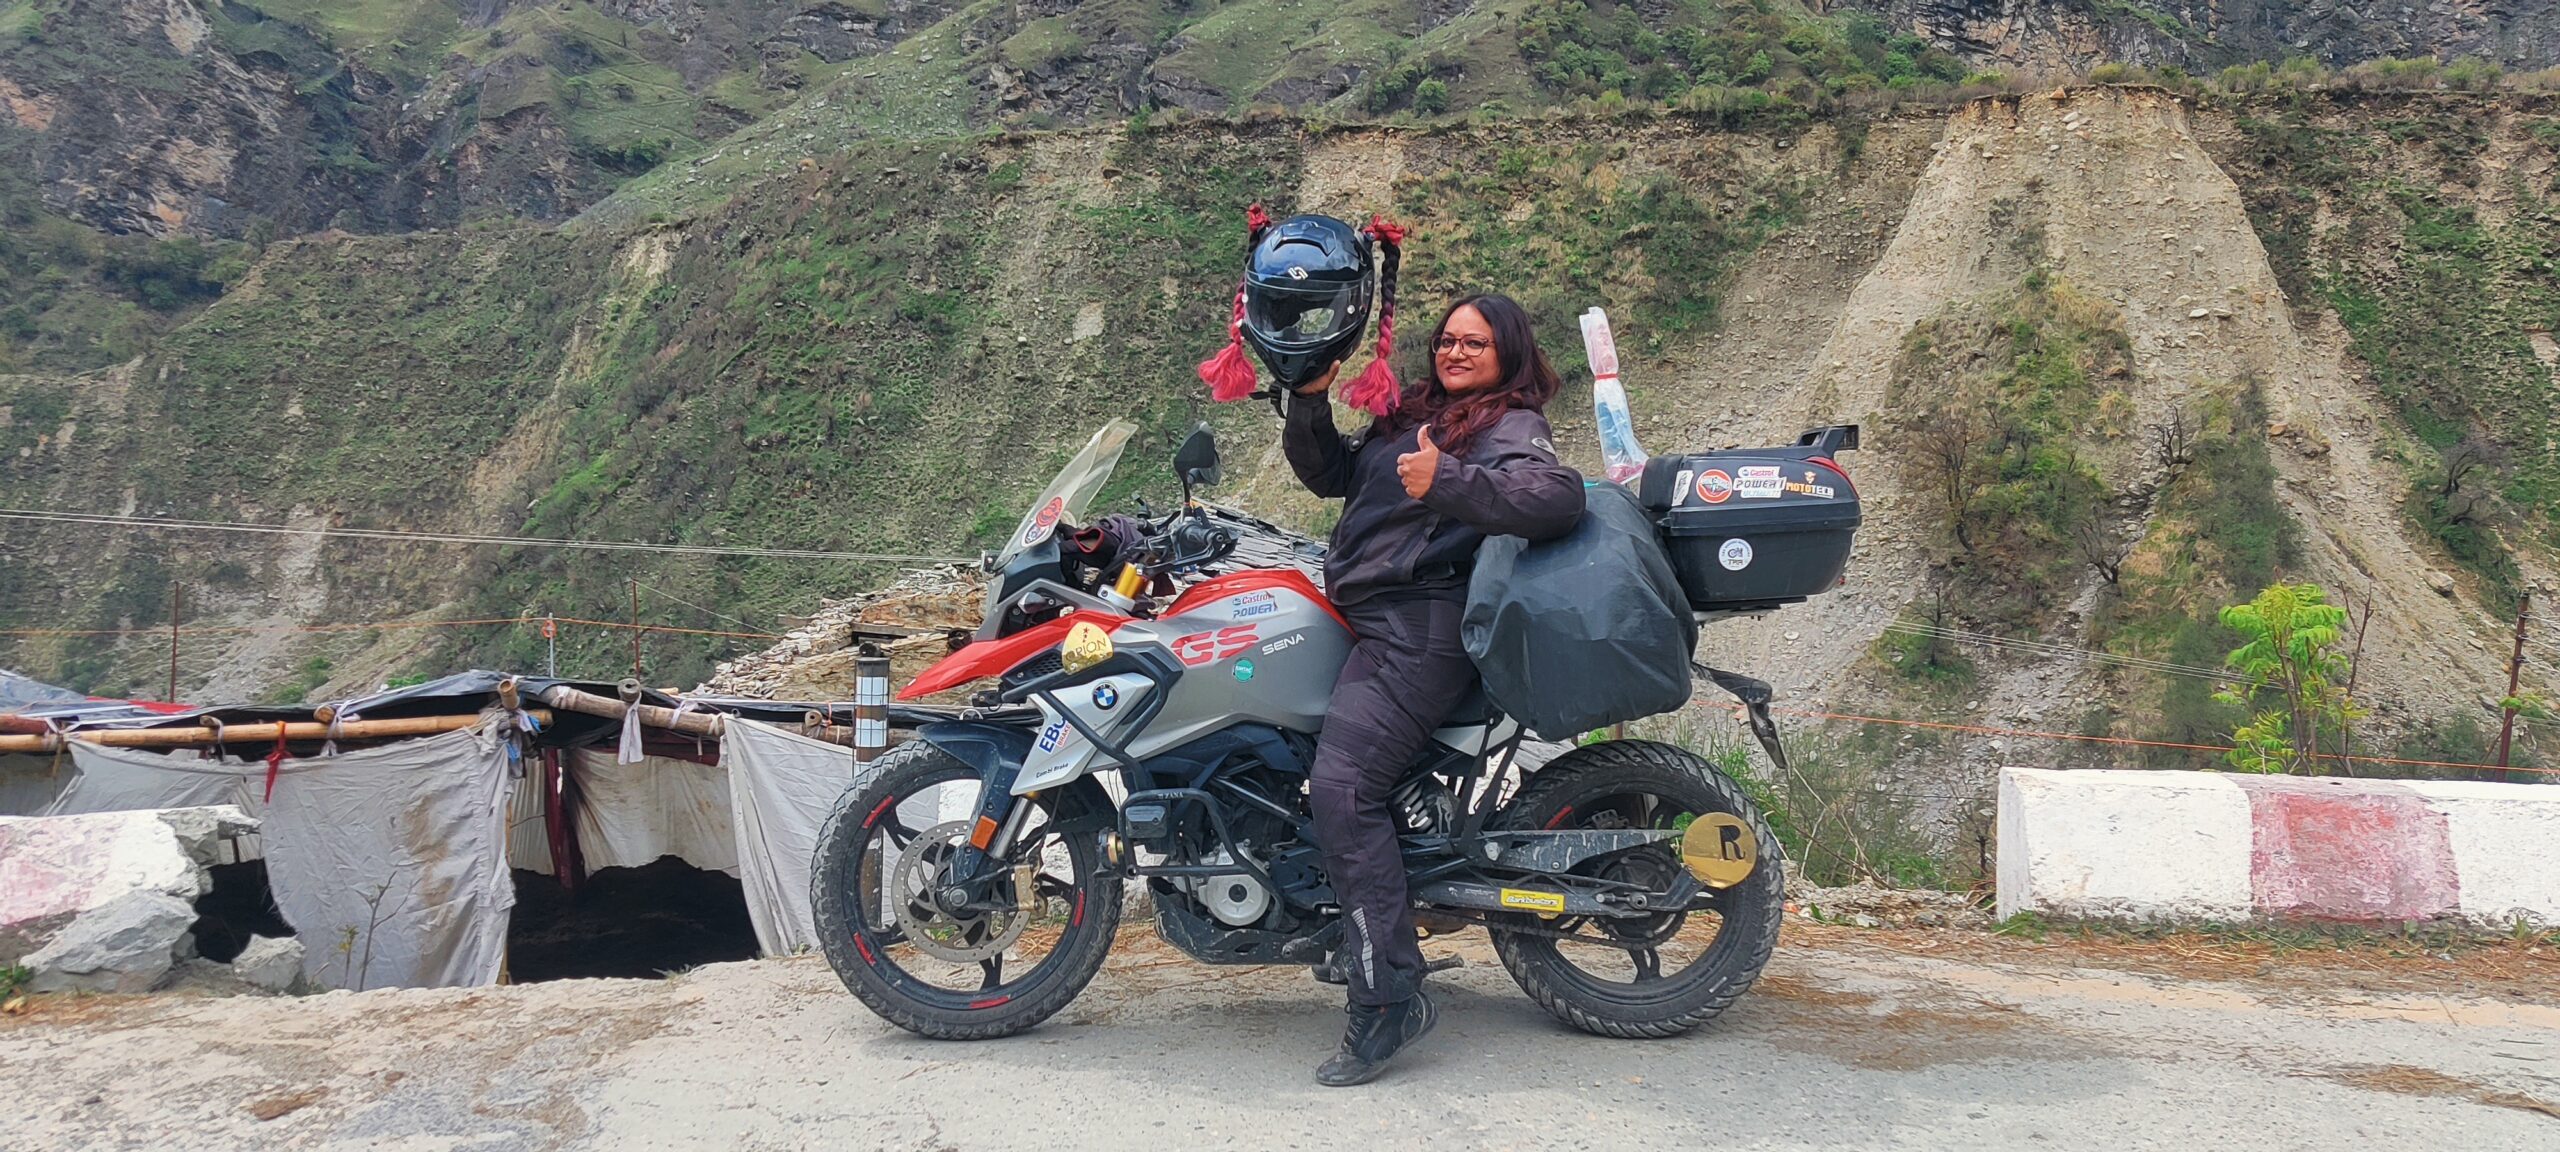 FIRST FEMALE MOTORCYCLE RIDER TO COMPLETE CHAR DHAM EXPEDITION.